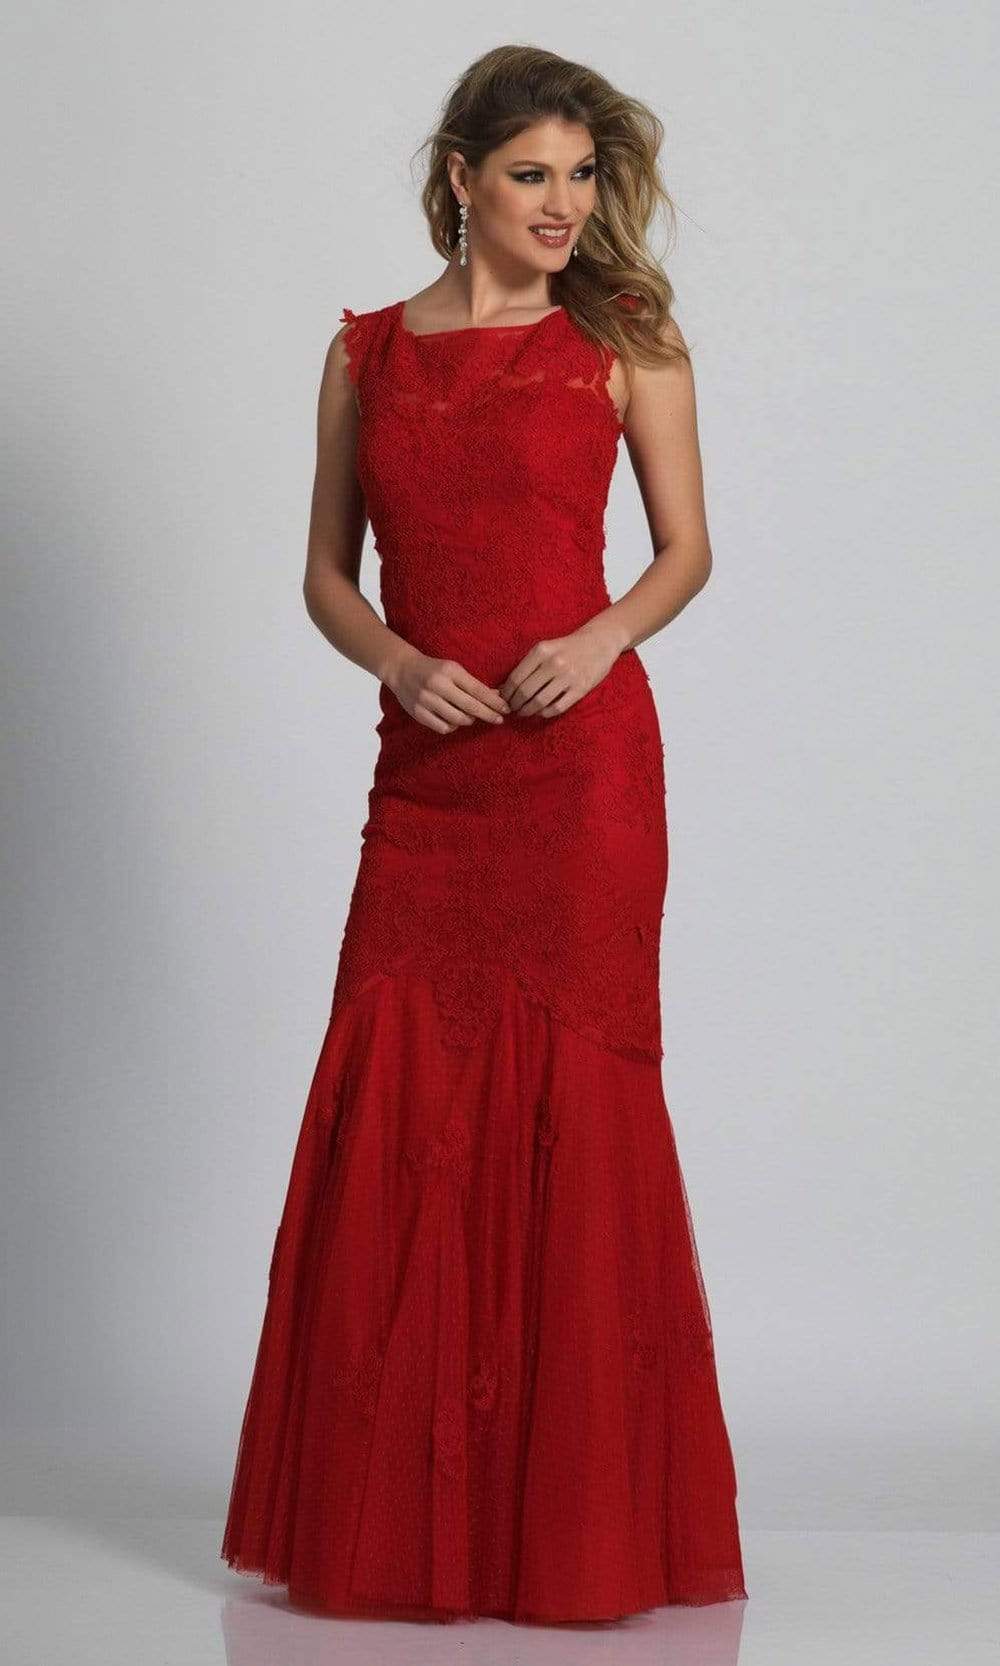 Image of Dave & Johnny - 1937 Lace Applique Tulle Trumpet Gown